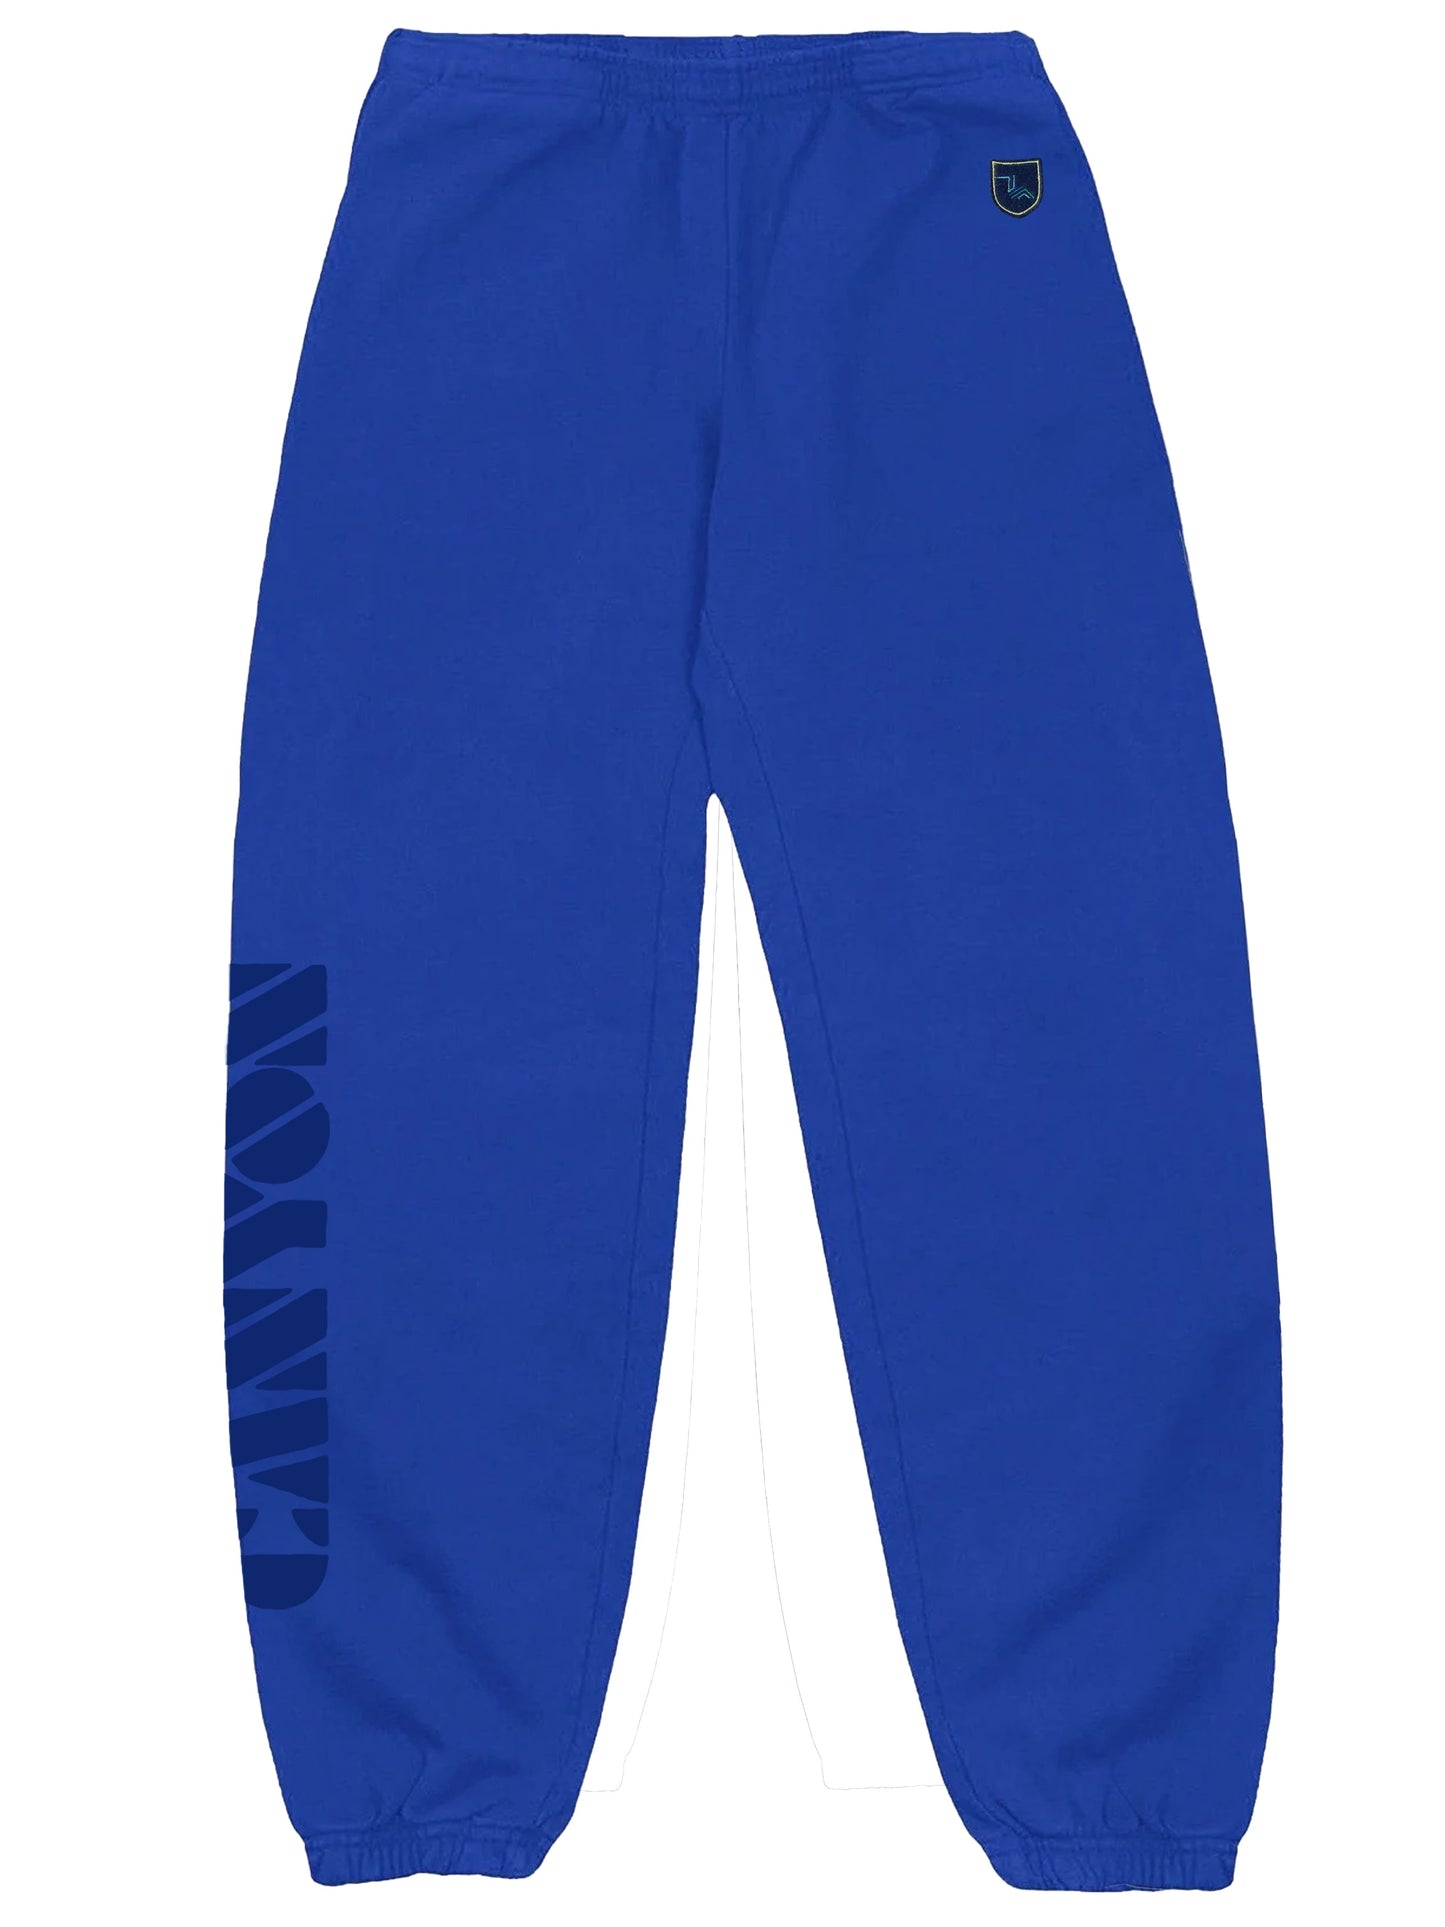 Canyon Adult Sweats in Cobalt